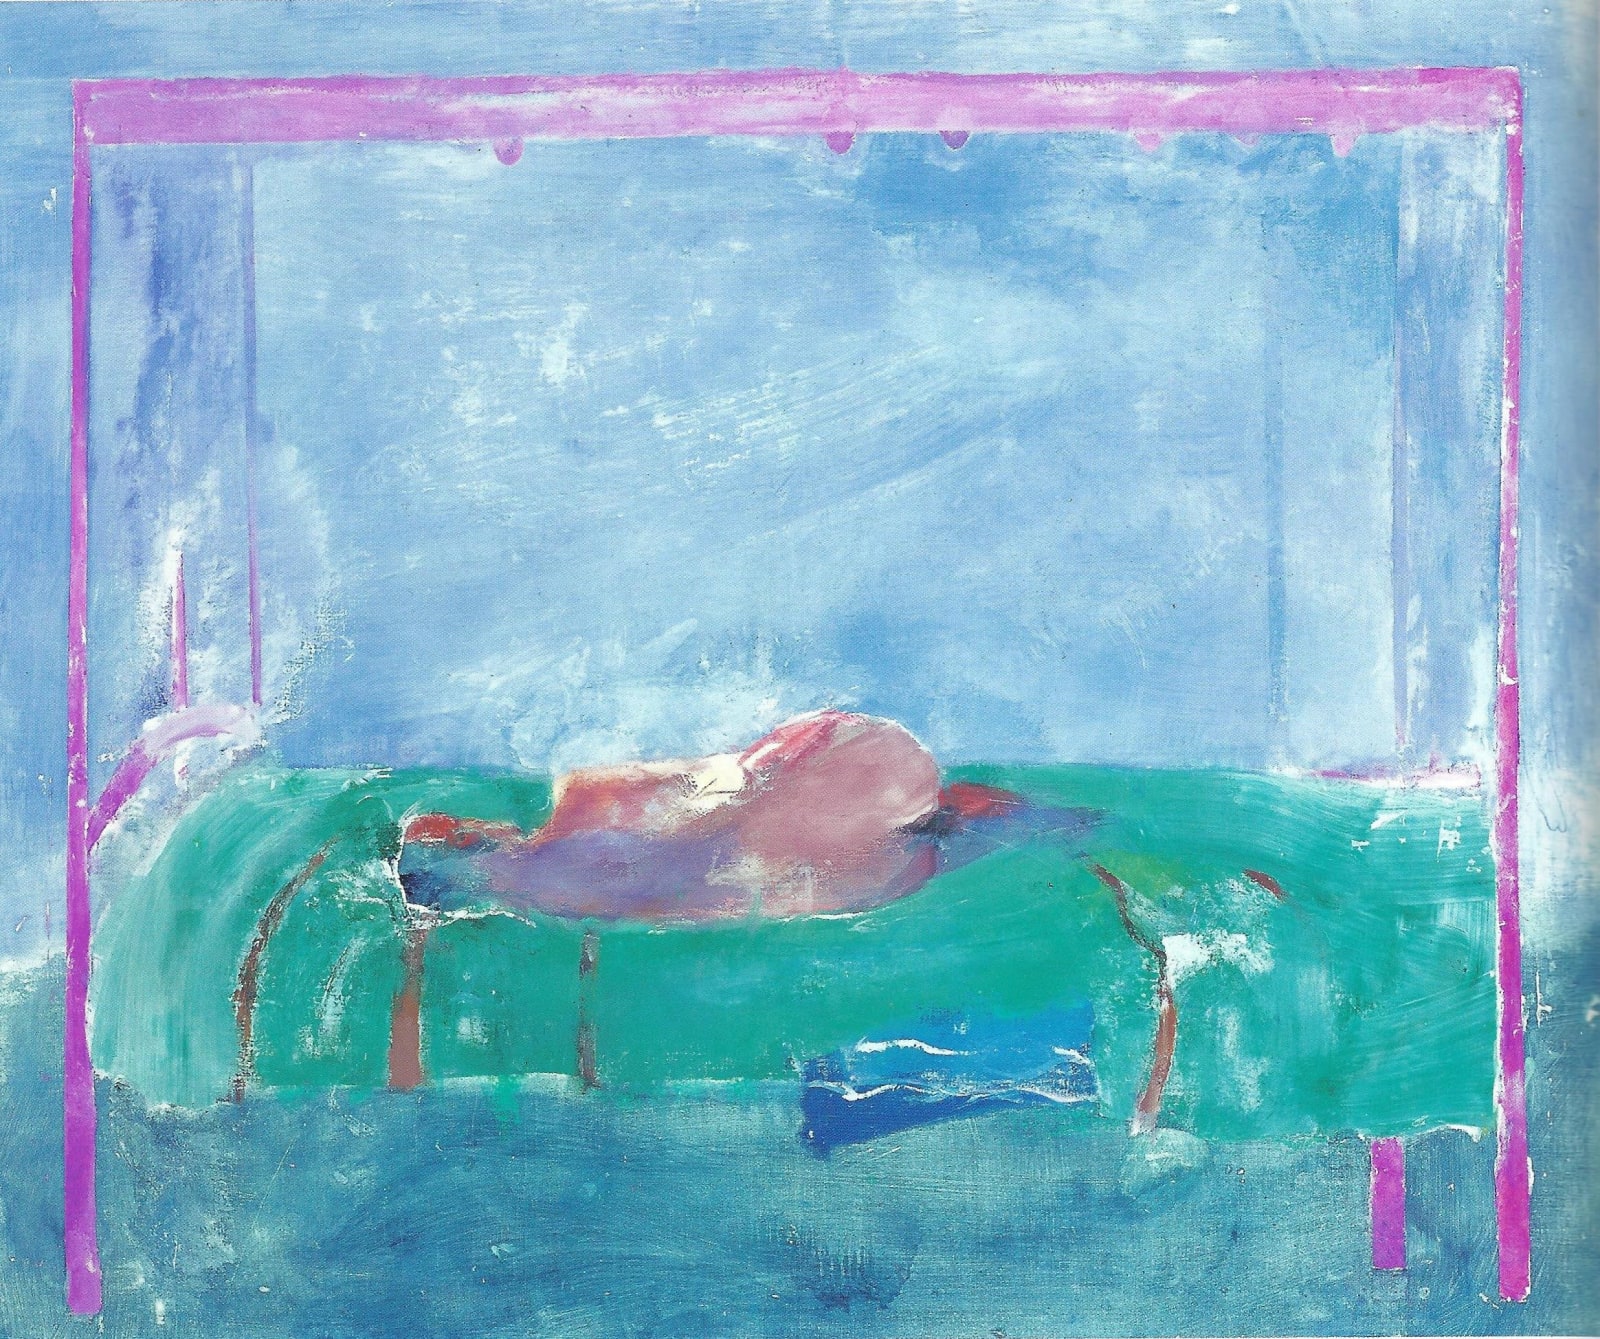 ANTHONY FRY, Nude on an Indian Bed, 1990-94